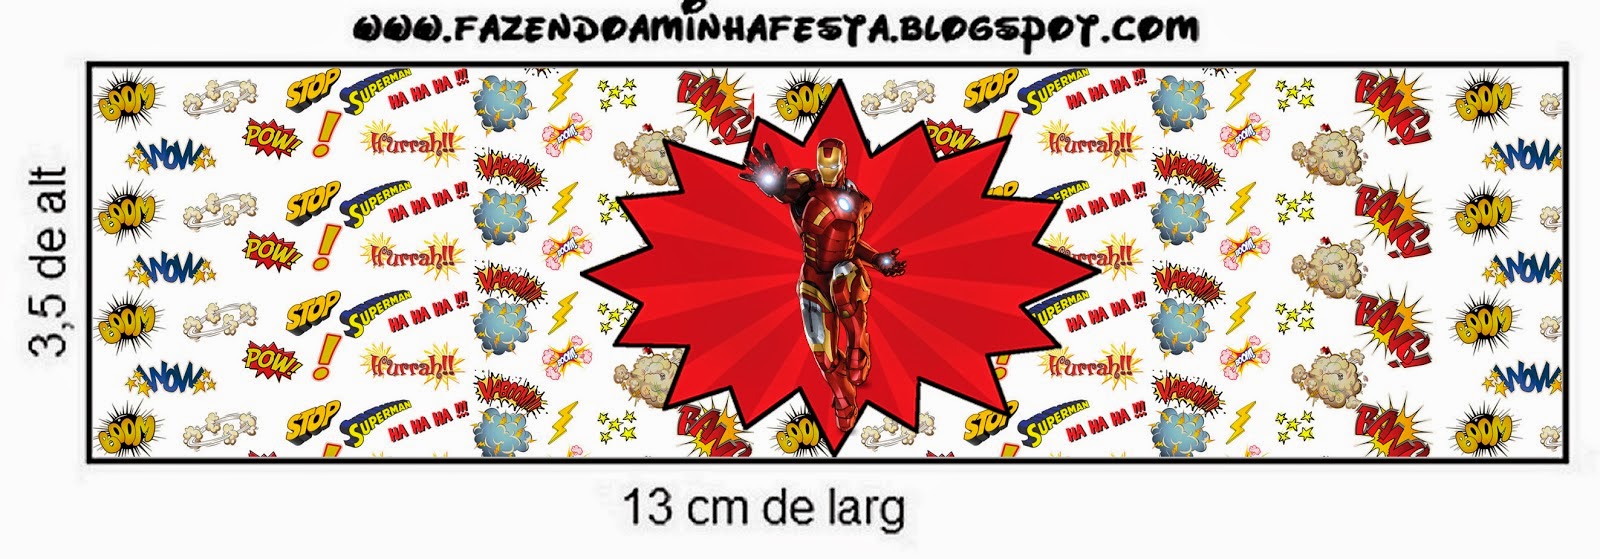 Iron Man: Free Printable Candy Bar Labels. - Oh My Fiesta! for Geeks